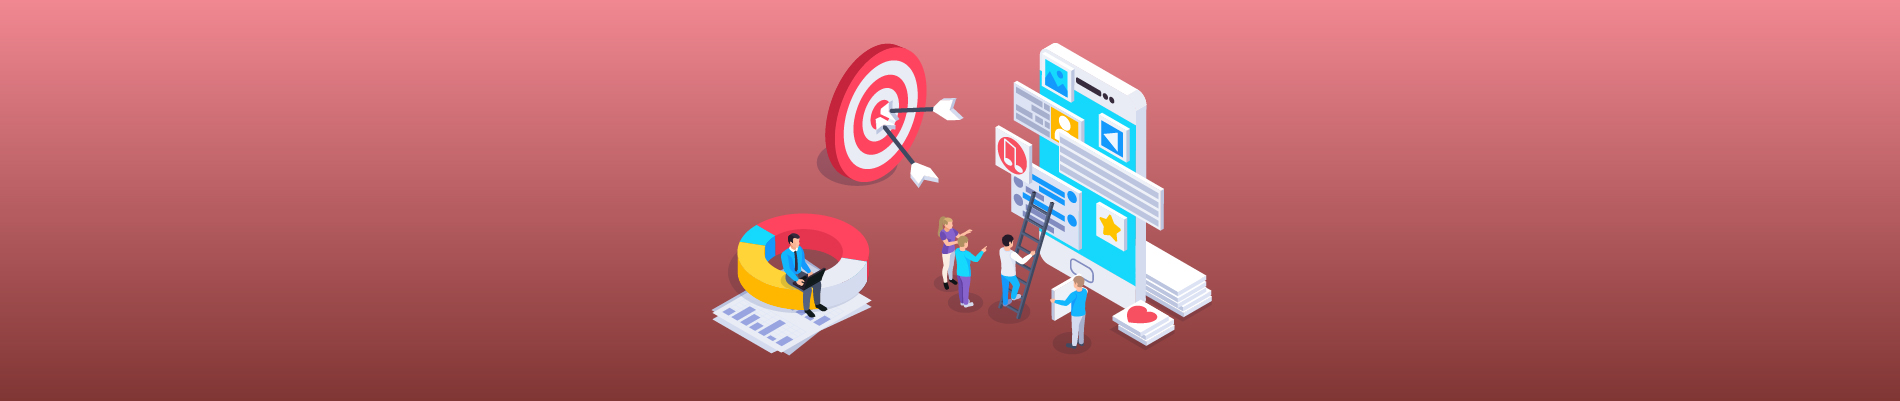 Top 5 Marketing Channels to Improve Conversion in 2021